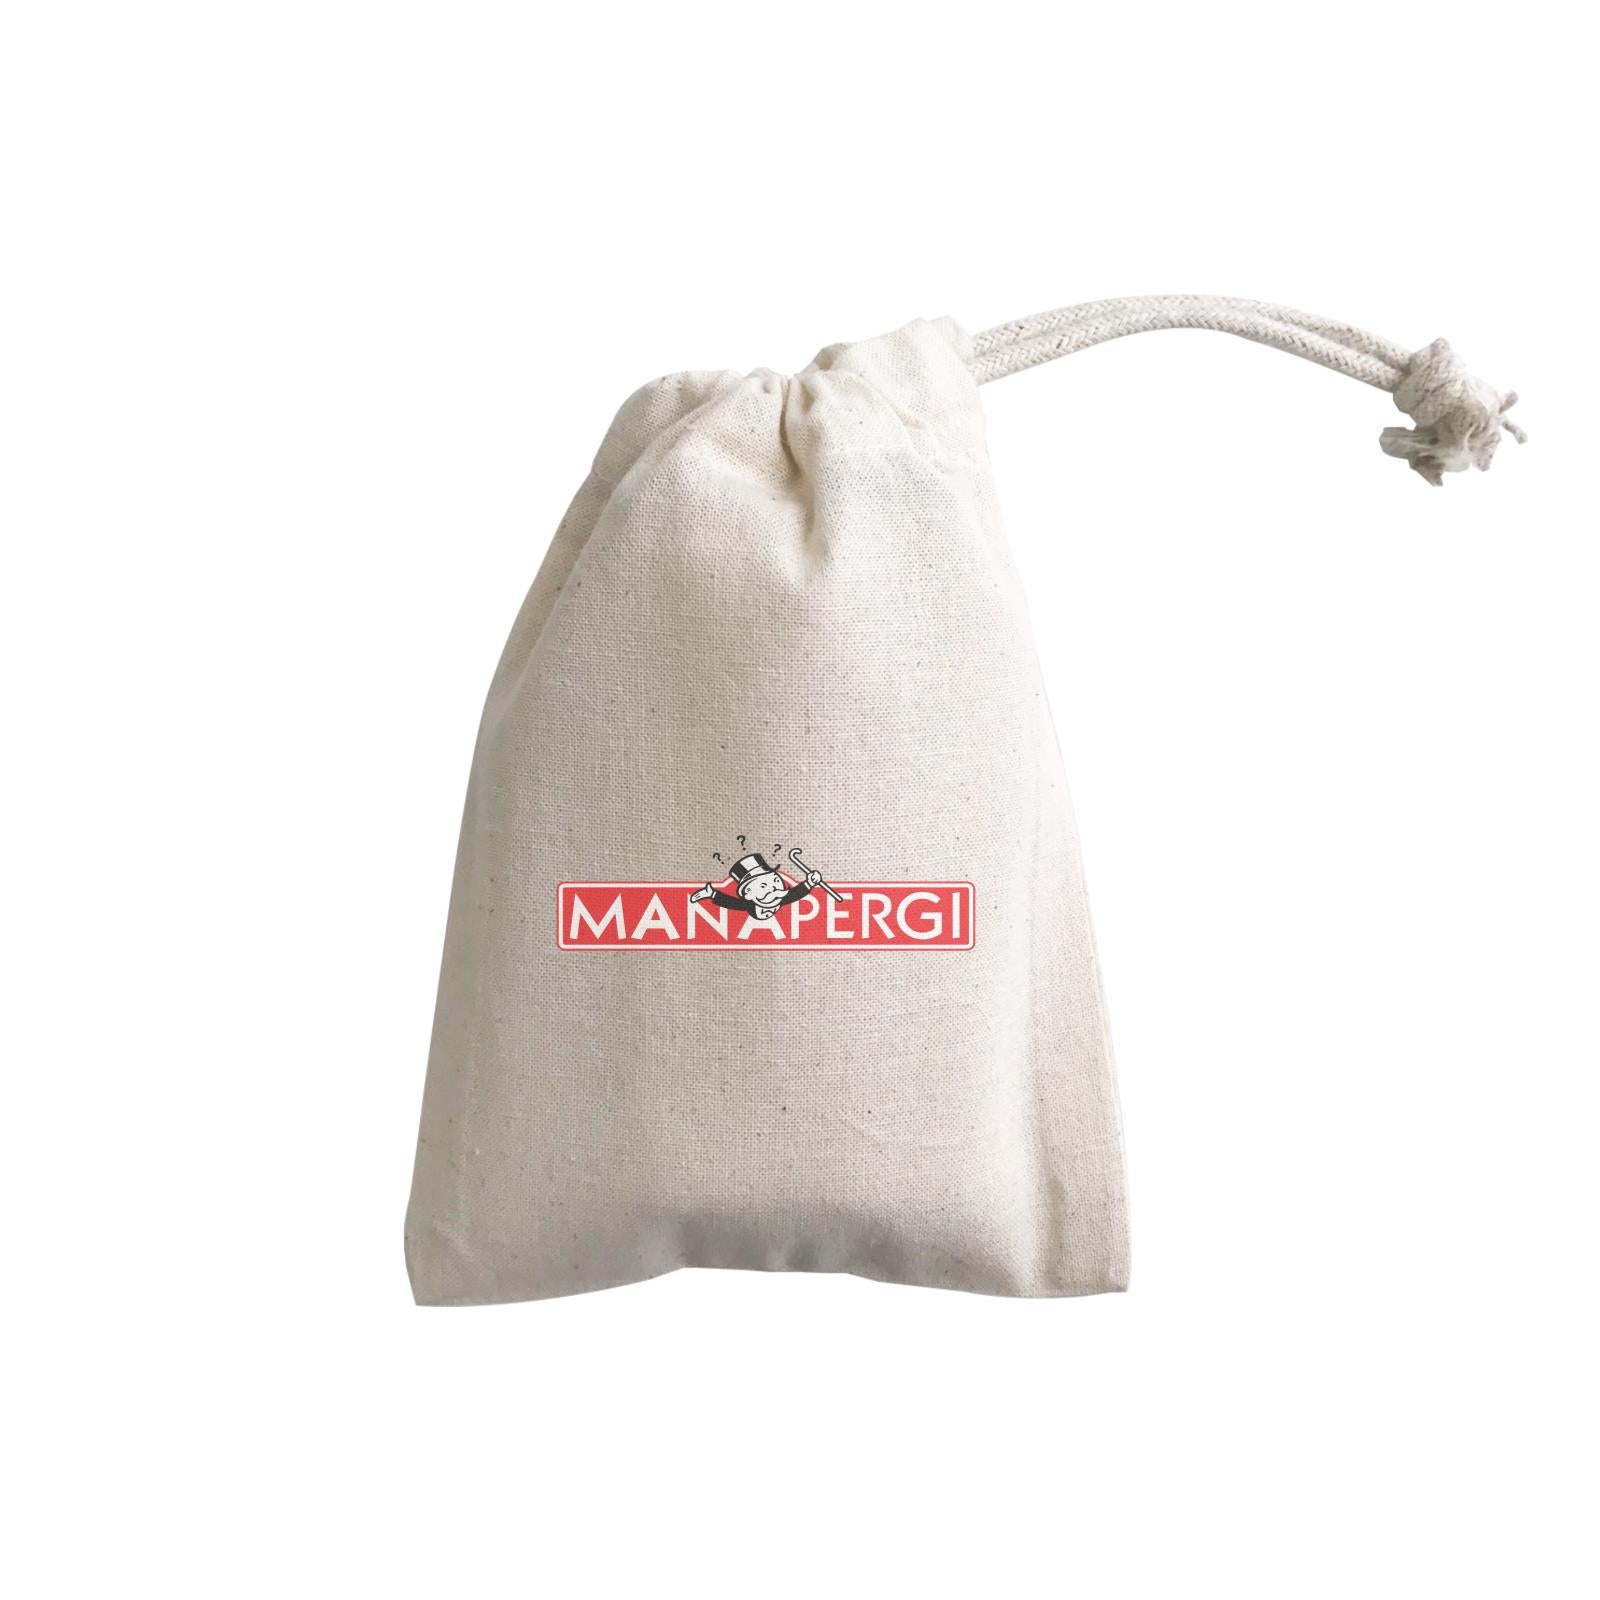 Slang Statement Manapergi GP Gift Pouch